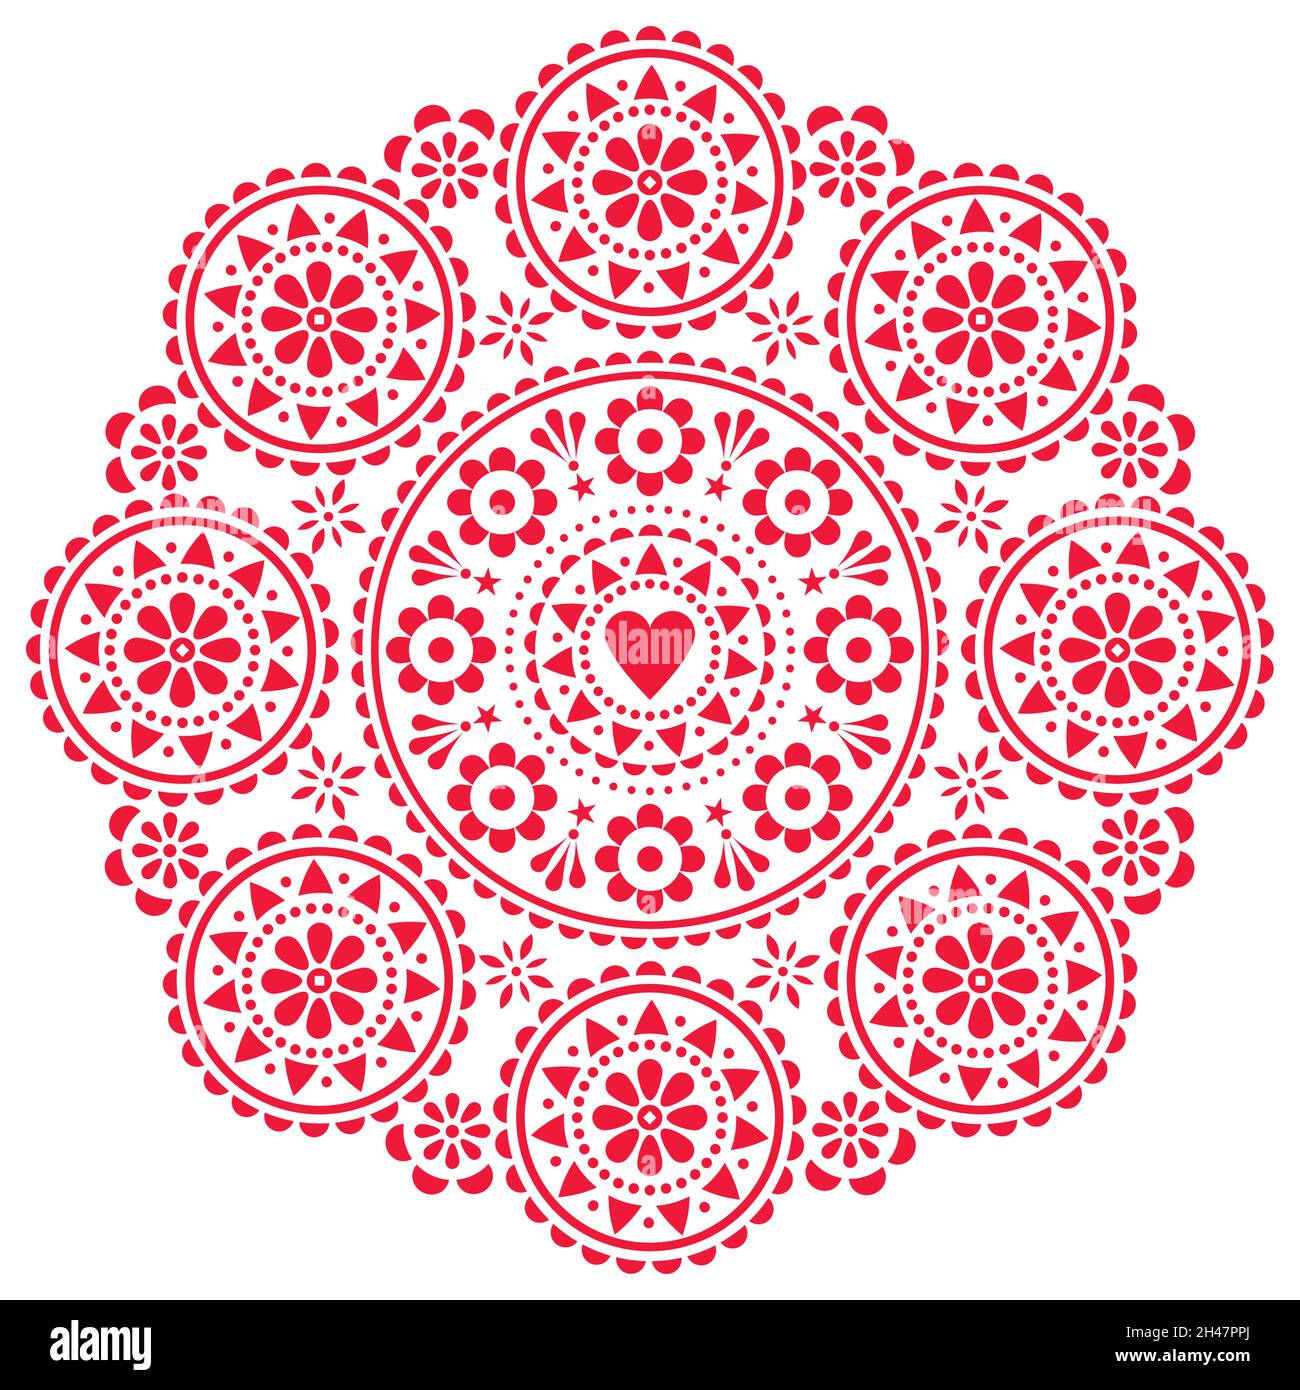 Scandinavian folk style vector decorative mandala pattern with flowers and hearts, Valentine's Day greeting card or wedding invitation design Stock Vector